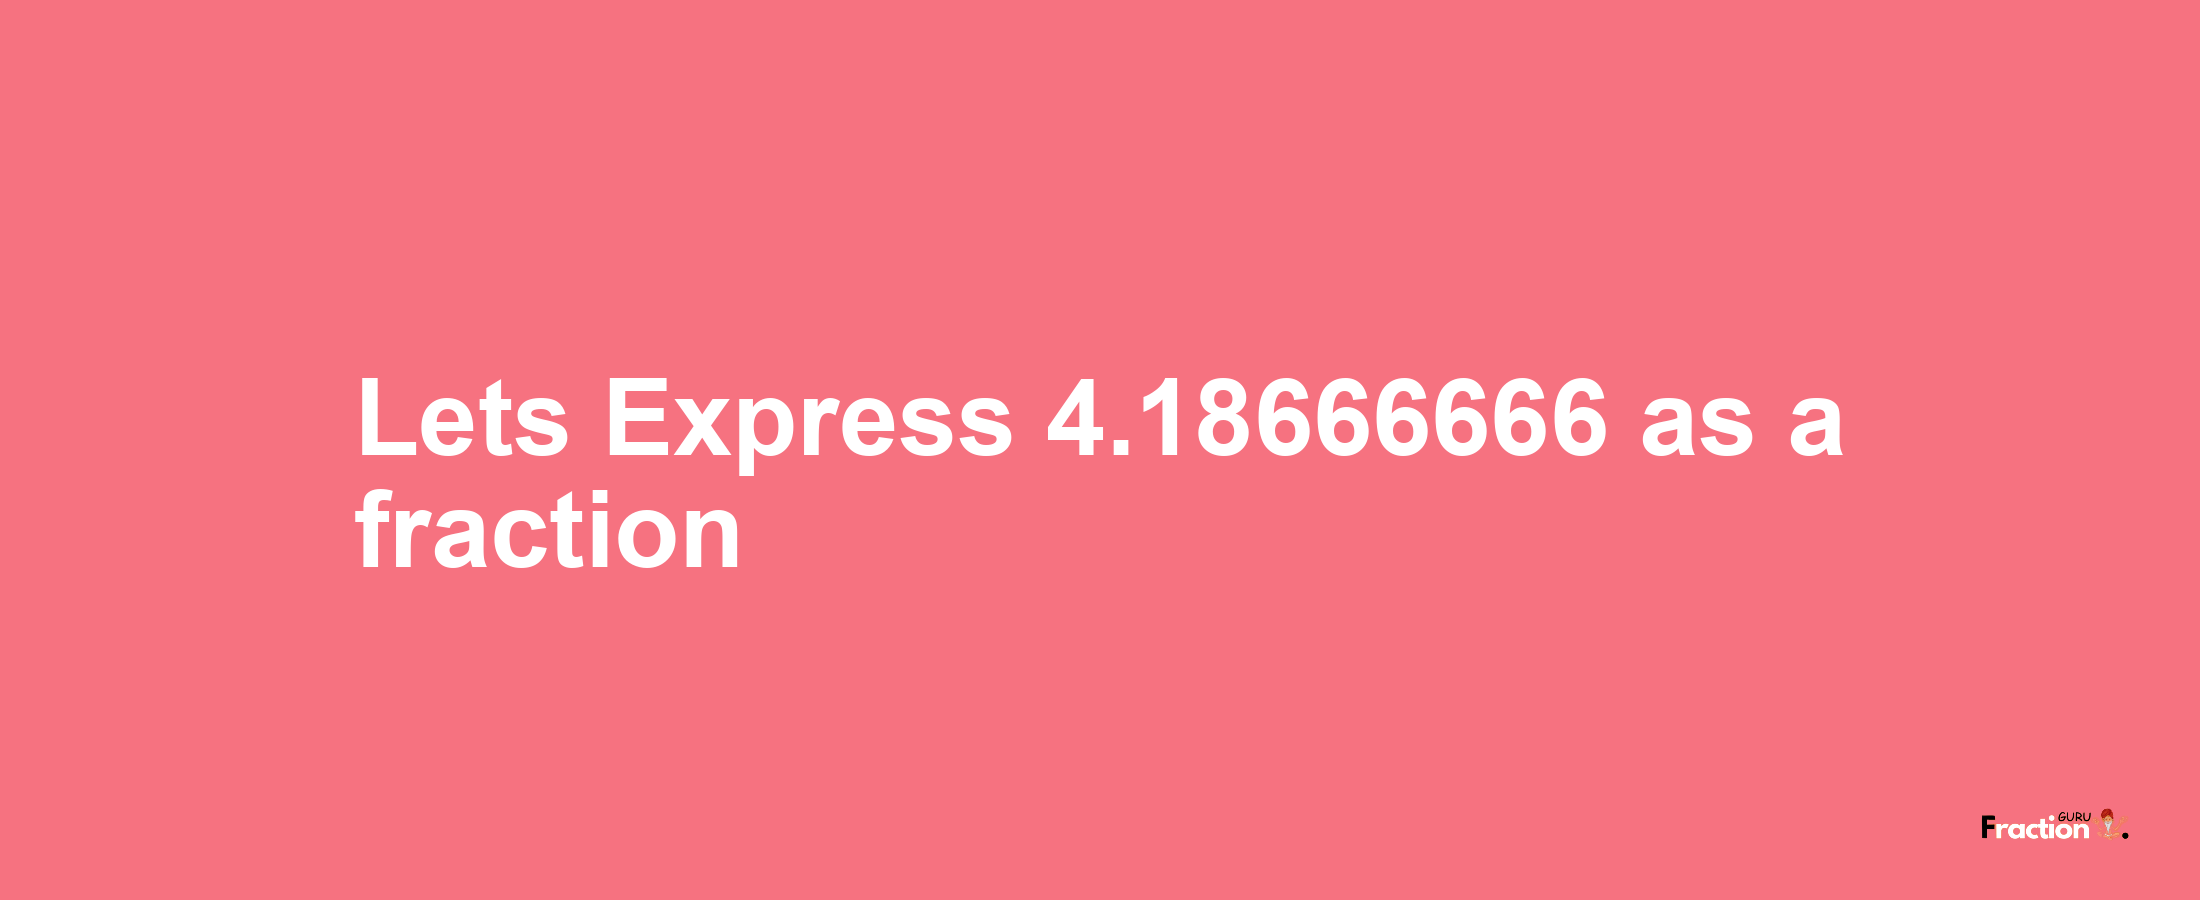 Lets Express 4.18666666 as afraction